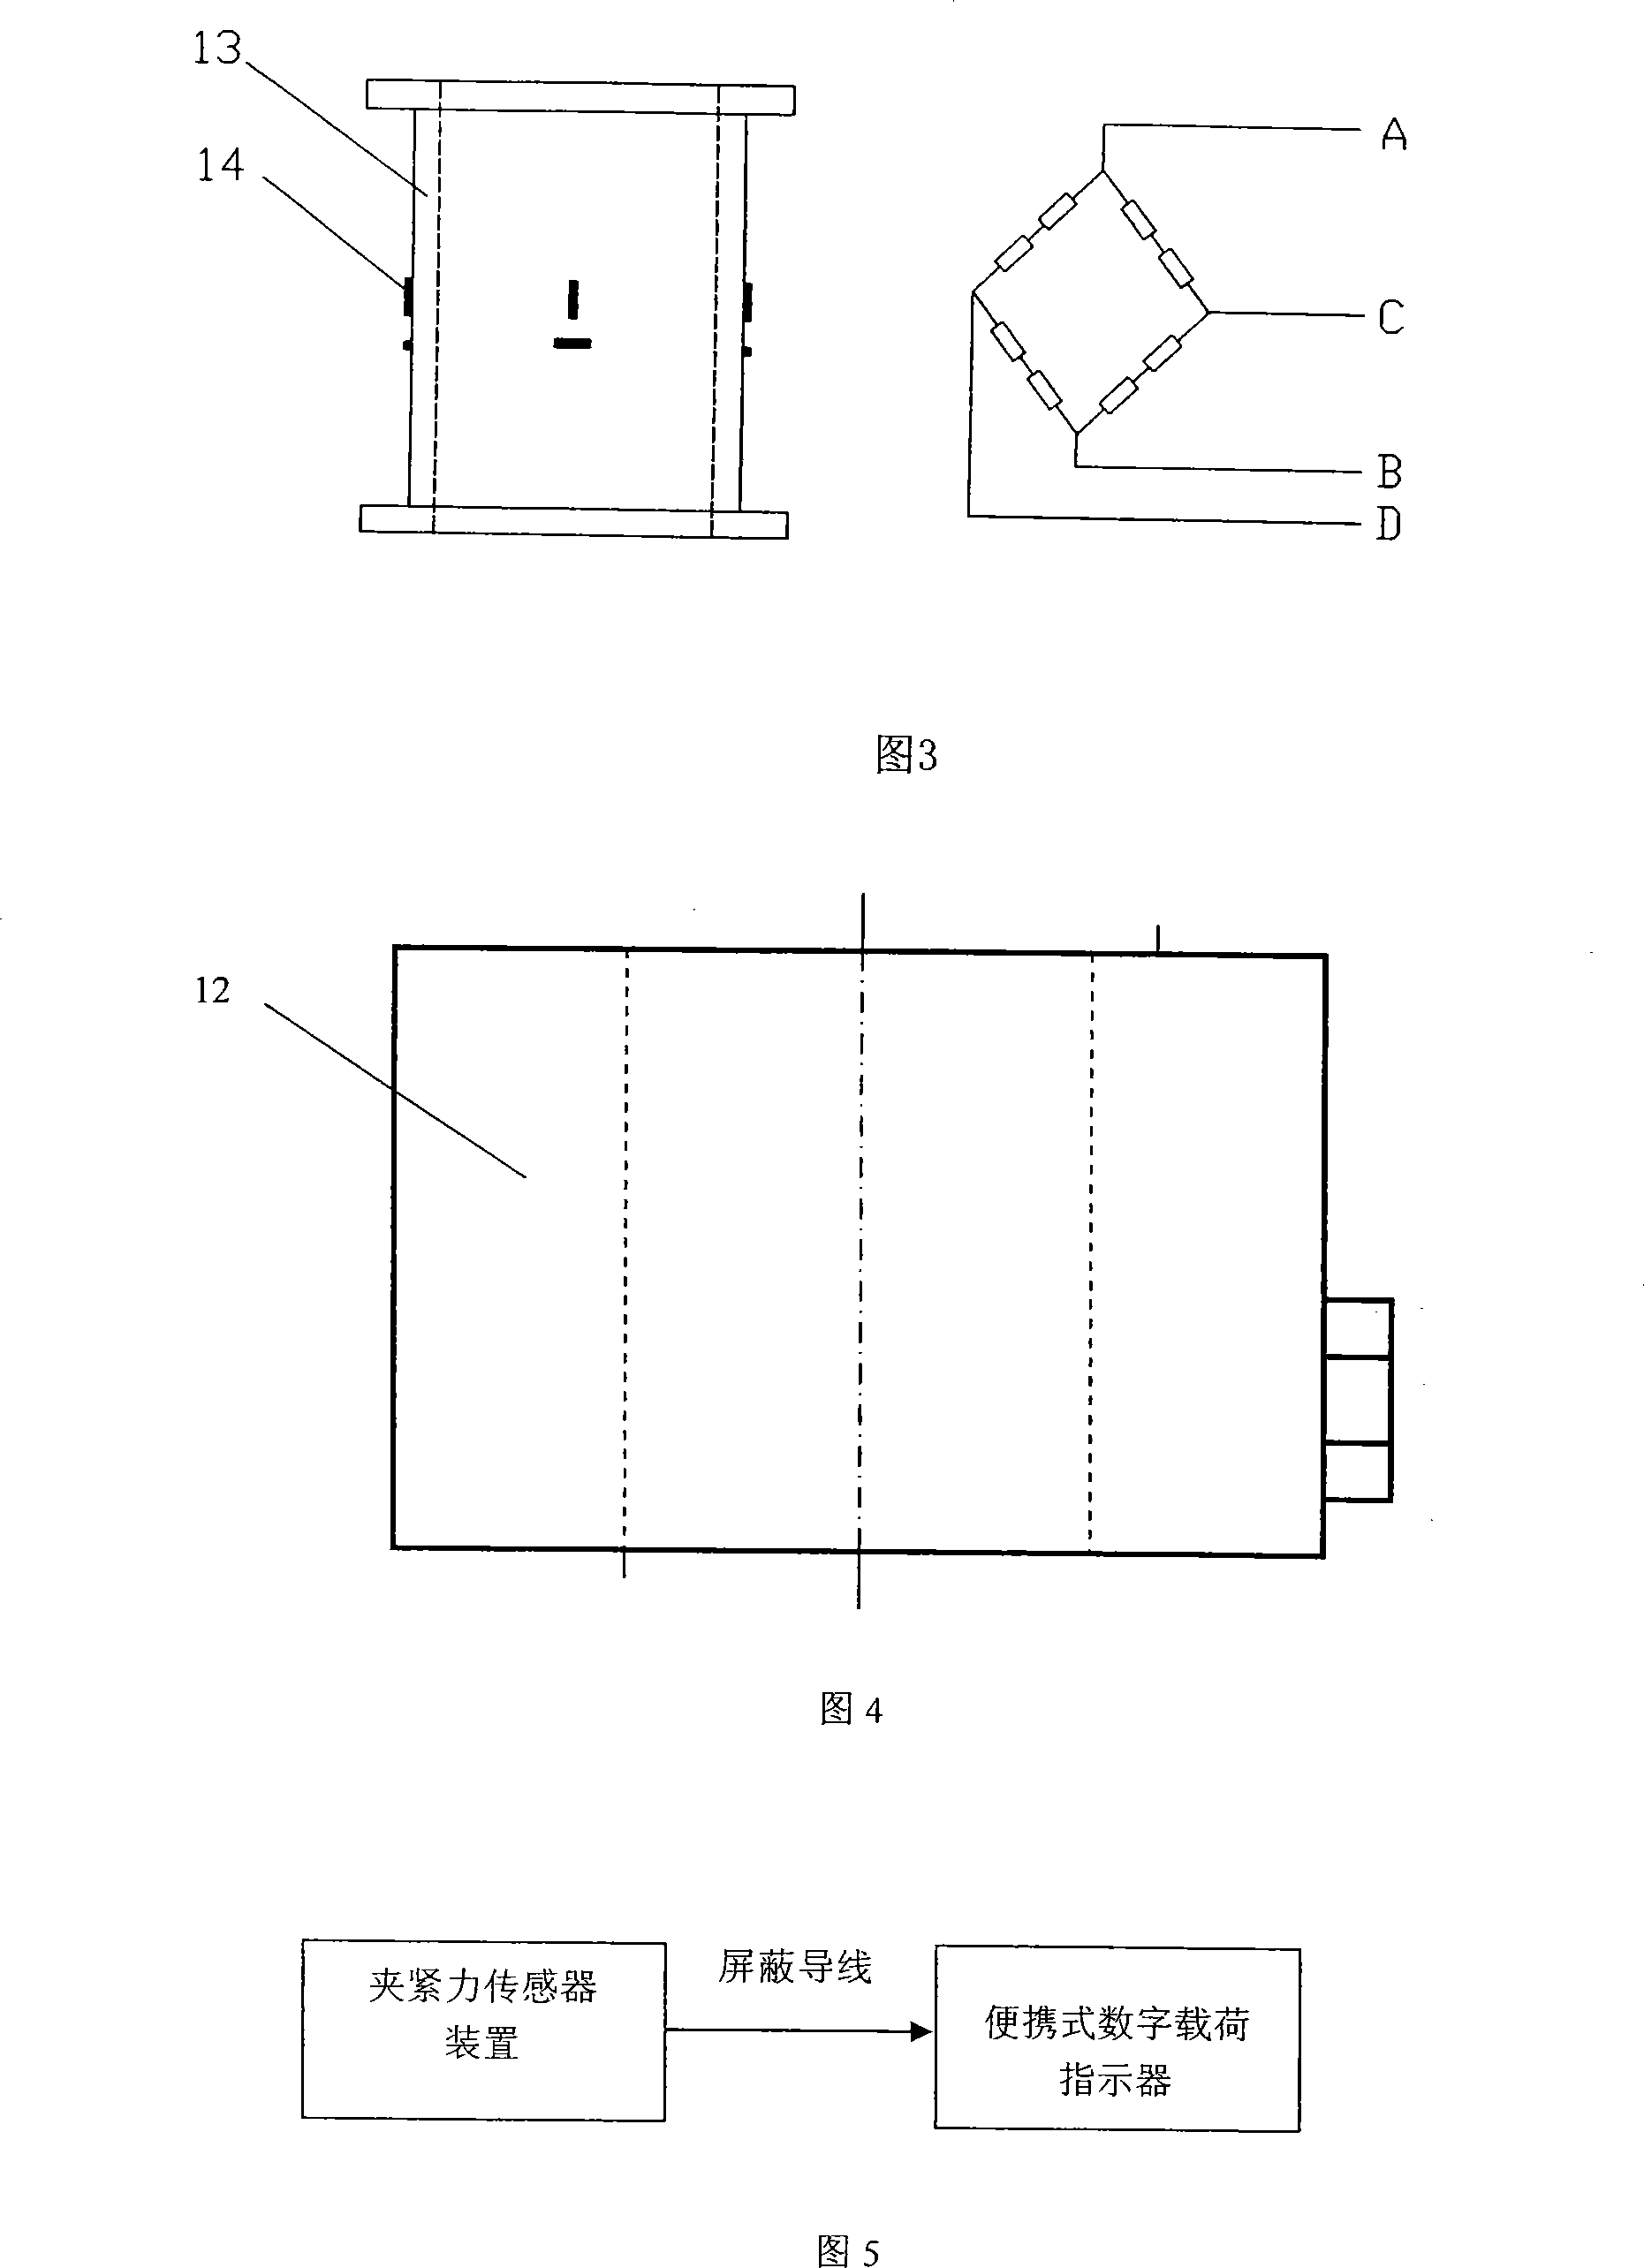 Method for measuring and regulating clamping force of coke oven tamping tool hammer rod and measuring system